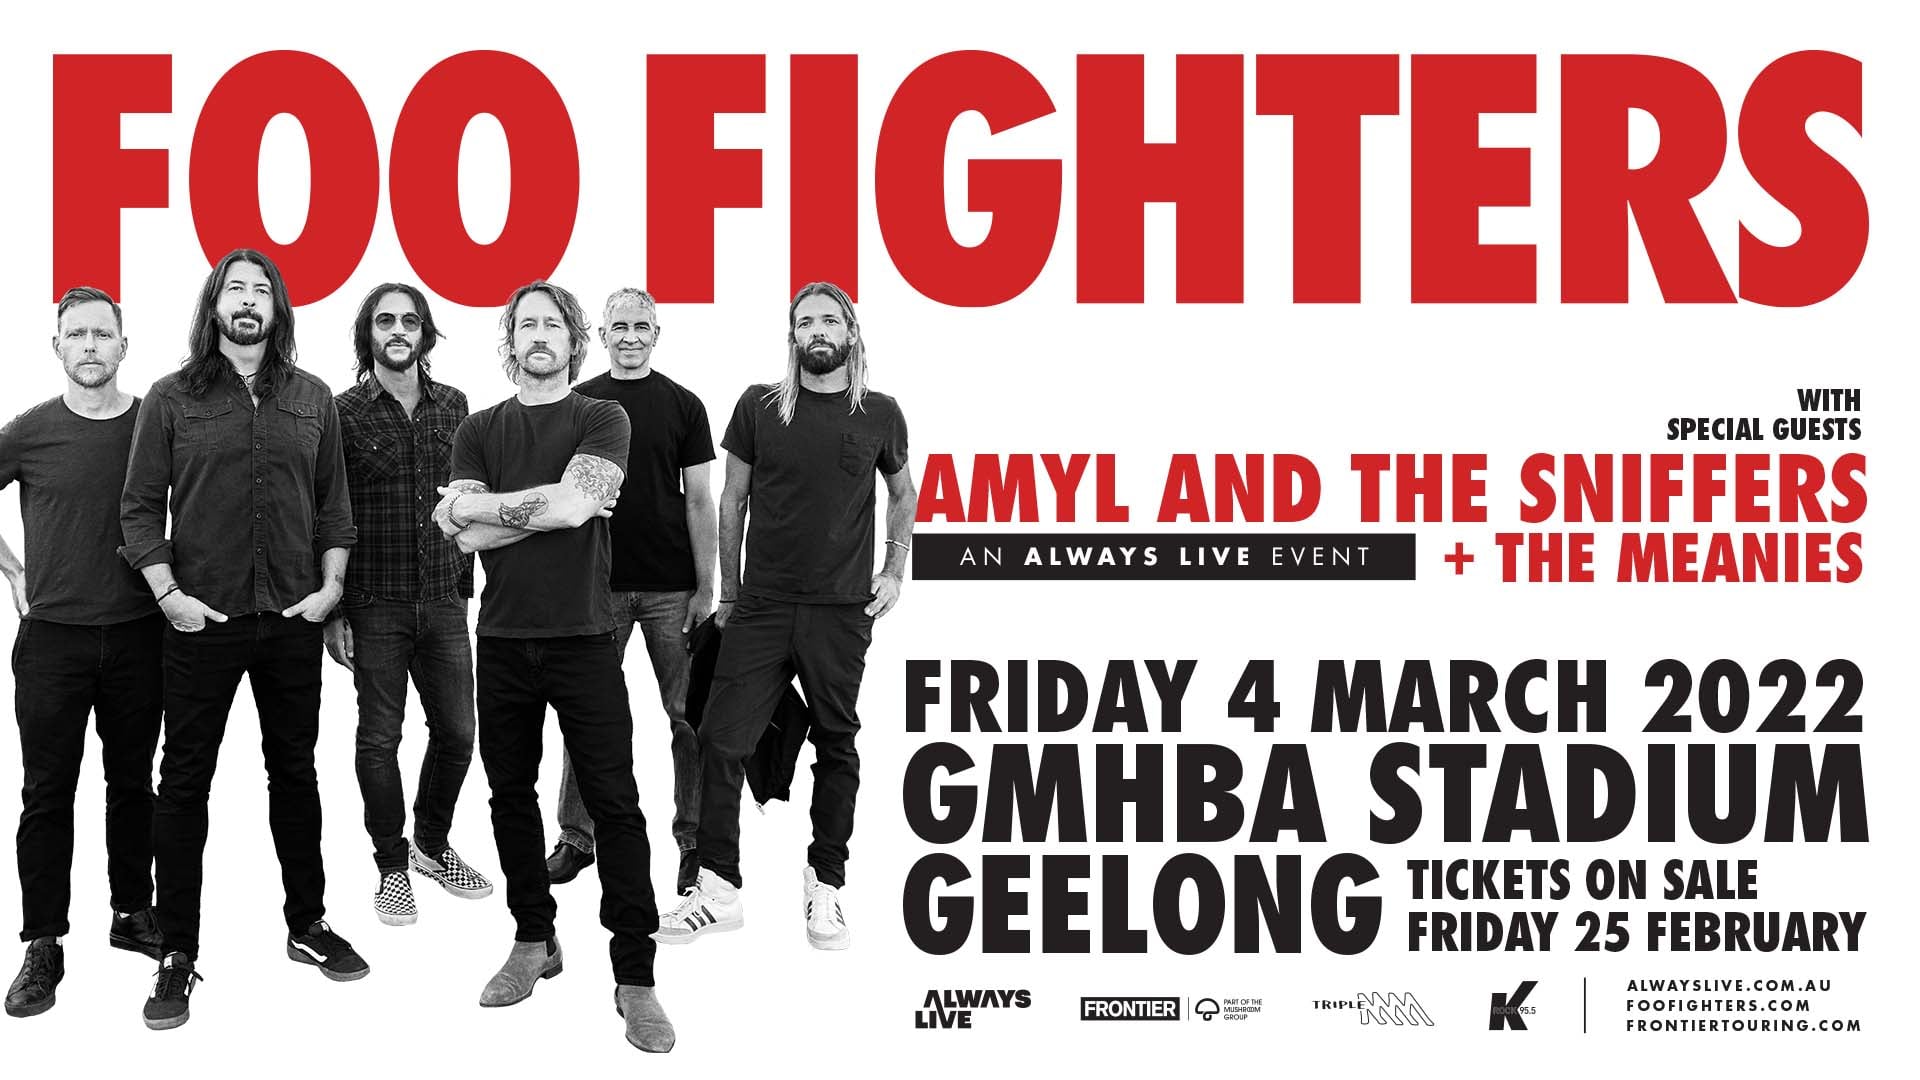 FOO FIGHTERS ONE NIGHT ONLY! PERFORMING AT GMHBA